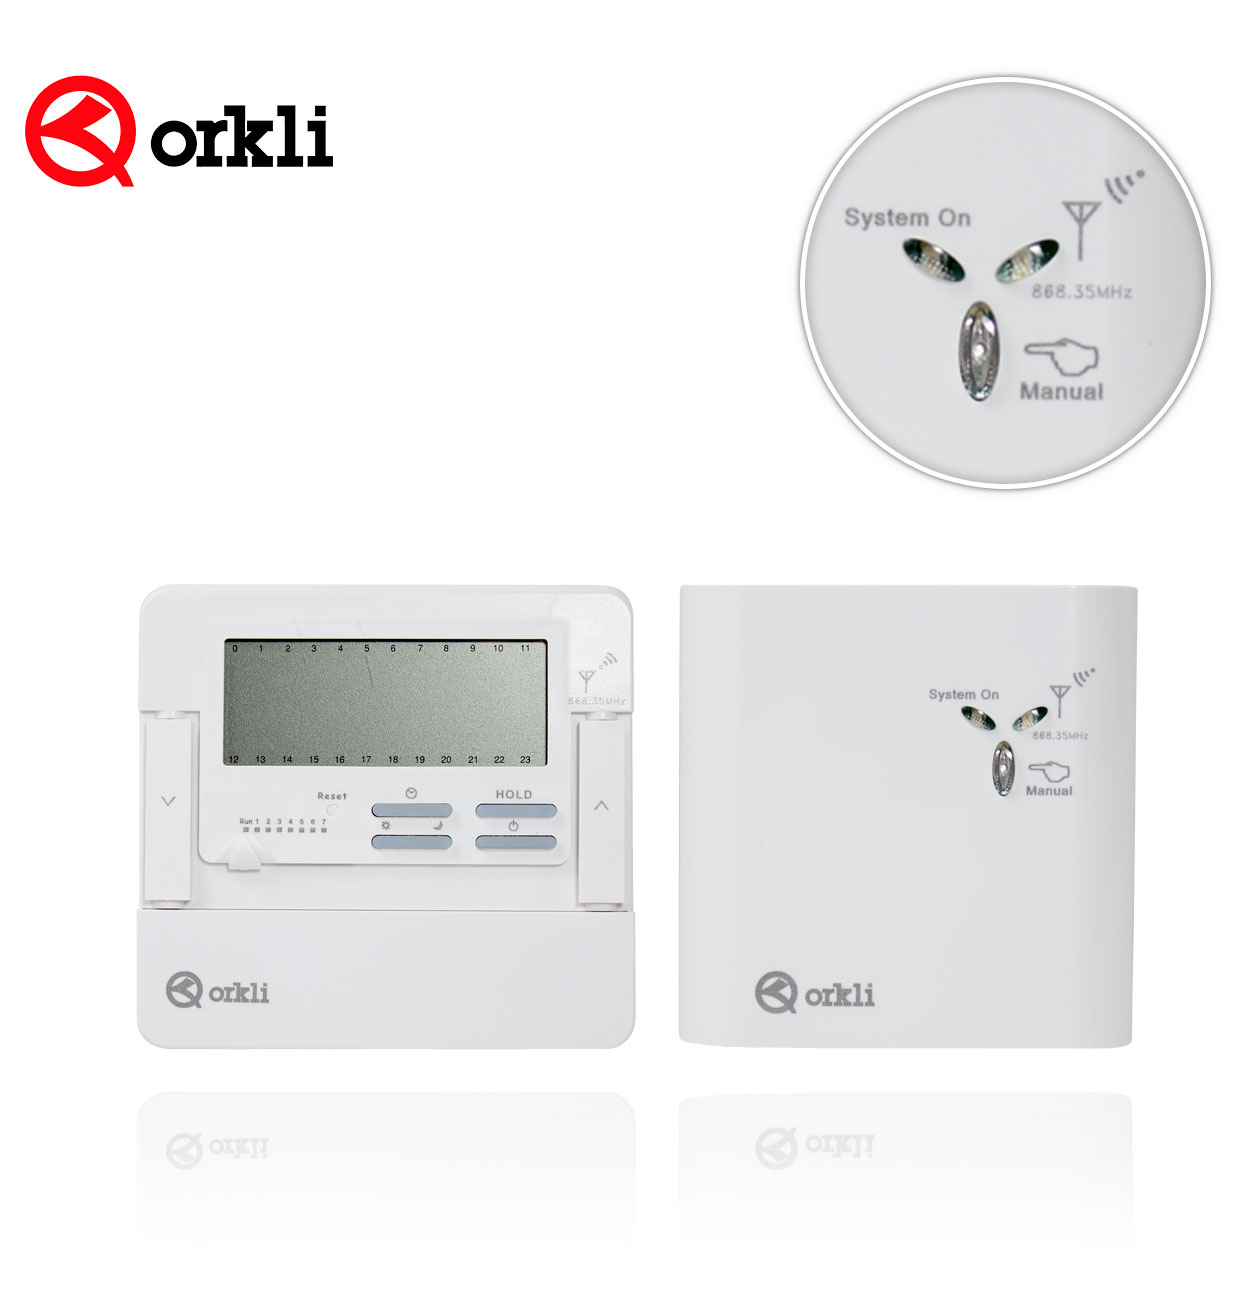 CS7 ORKLI WEEKLY REMOTE CONTROLLED CHRONO-THERMOSTAT